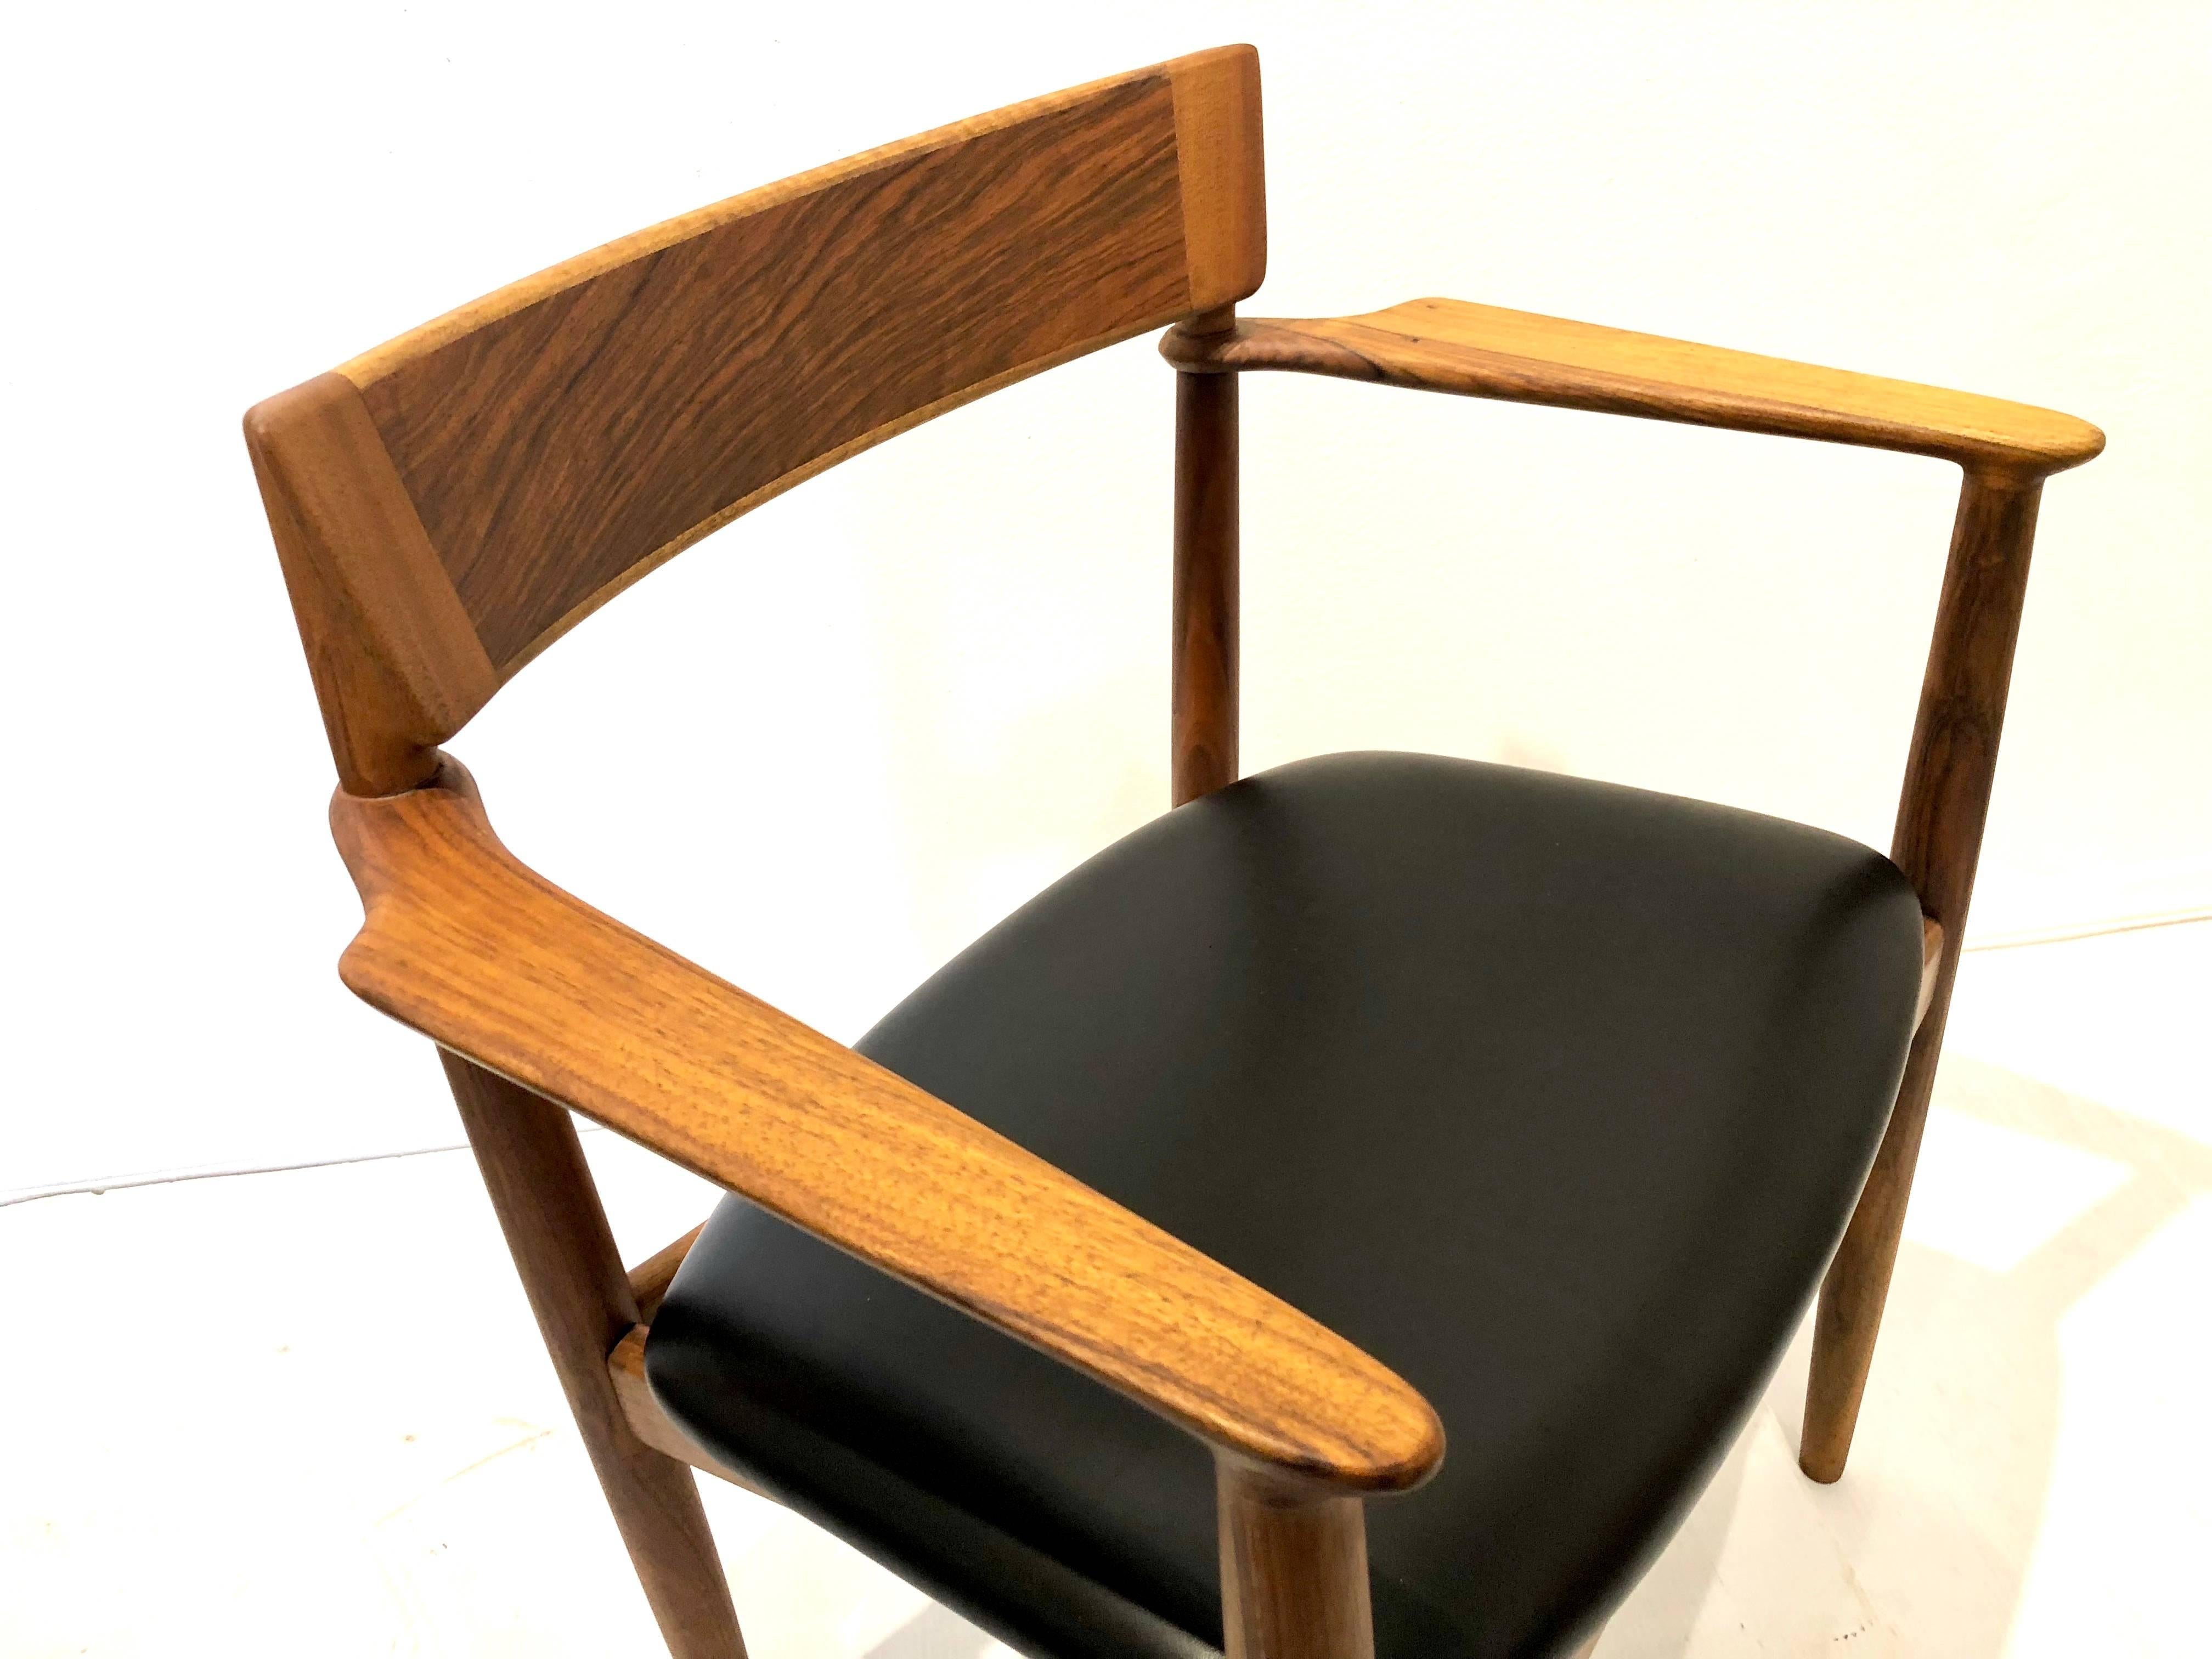 20th Century Danish Modern Rosewood and Walnut Leather Seat Armchair by Grete Jalk